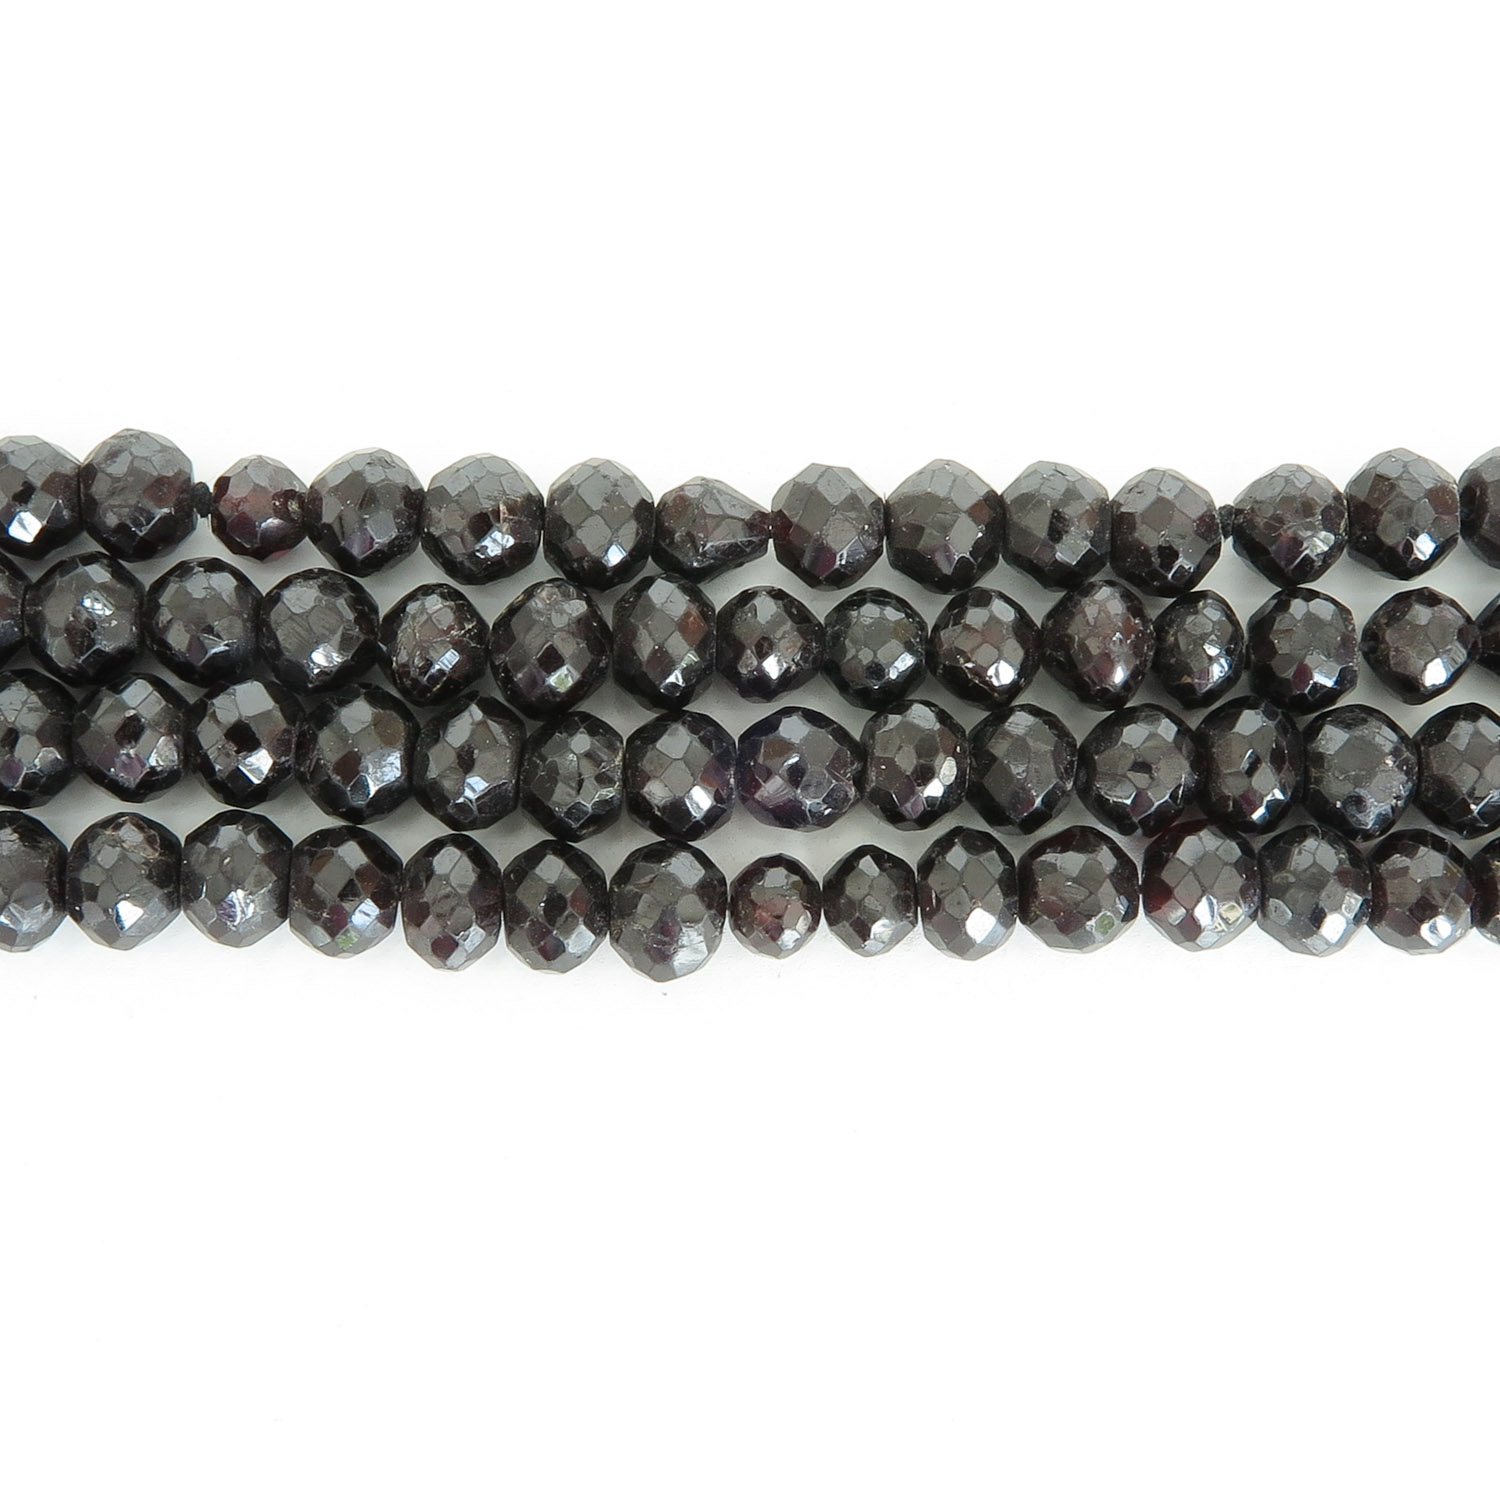 19th Century Garnet Necklace with 14KG Clasp - Image 3 of 3